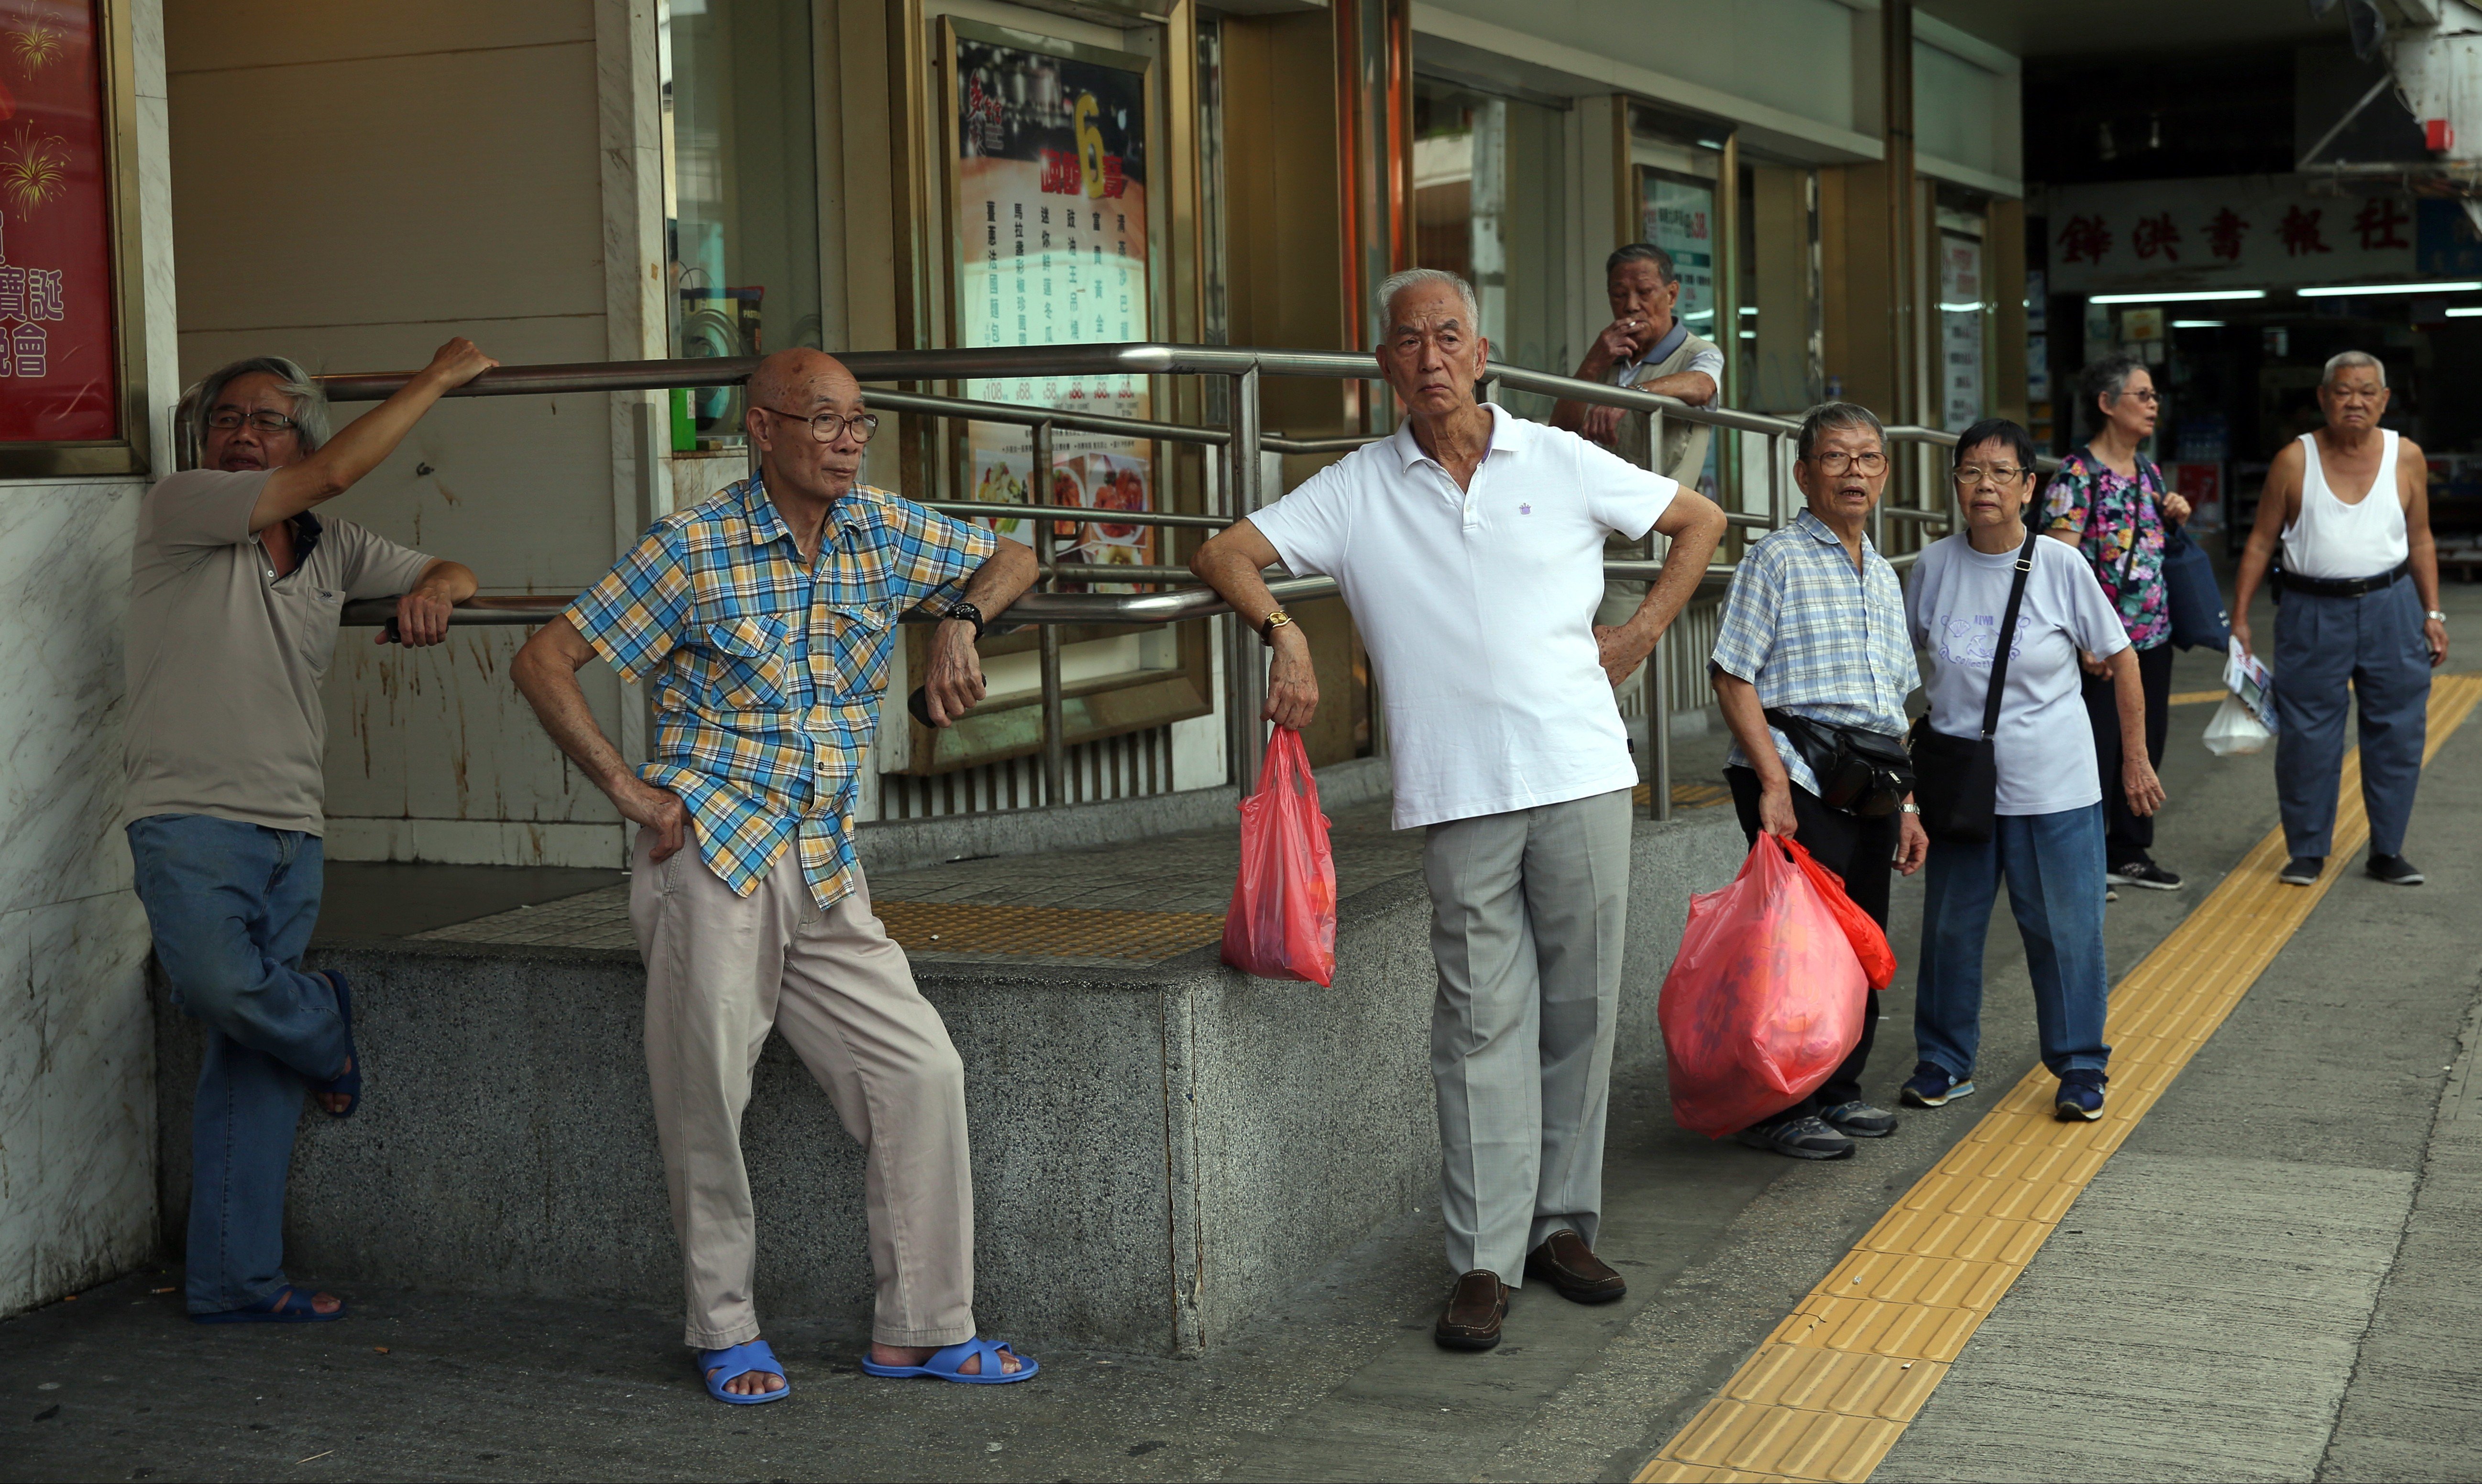 An AllianzGI survey has found that respondents have postponed their planned retirement to 62.4 because of the high cost of living and inflation, reflecting low confidence in their twilight years. Photo: Sam Tsang